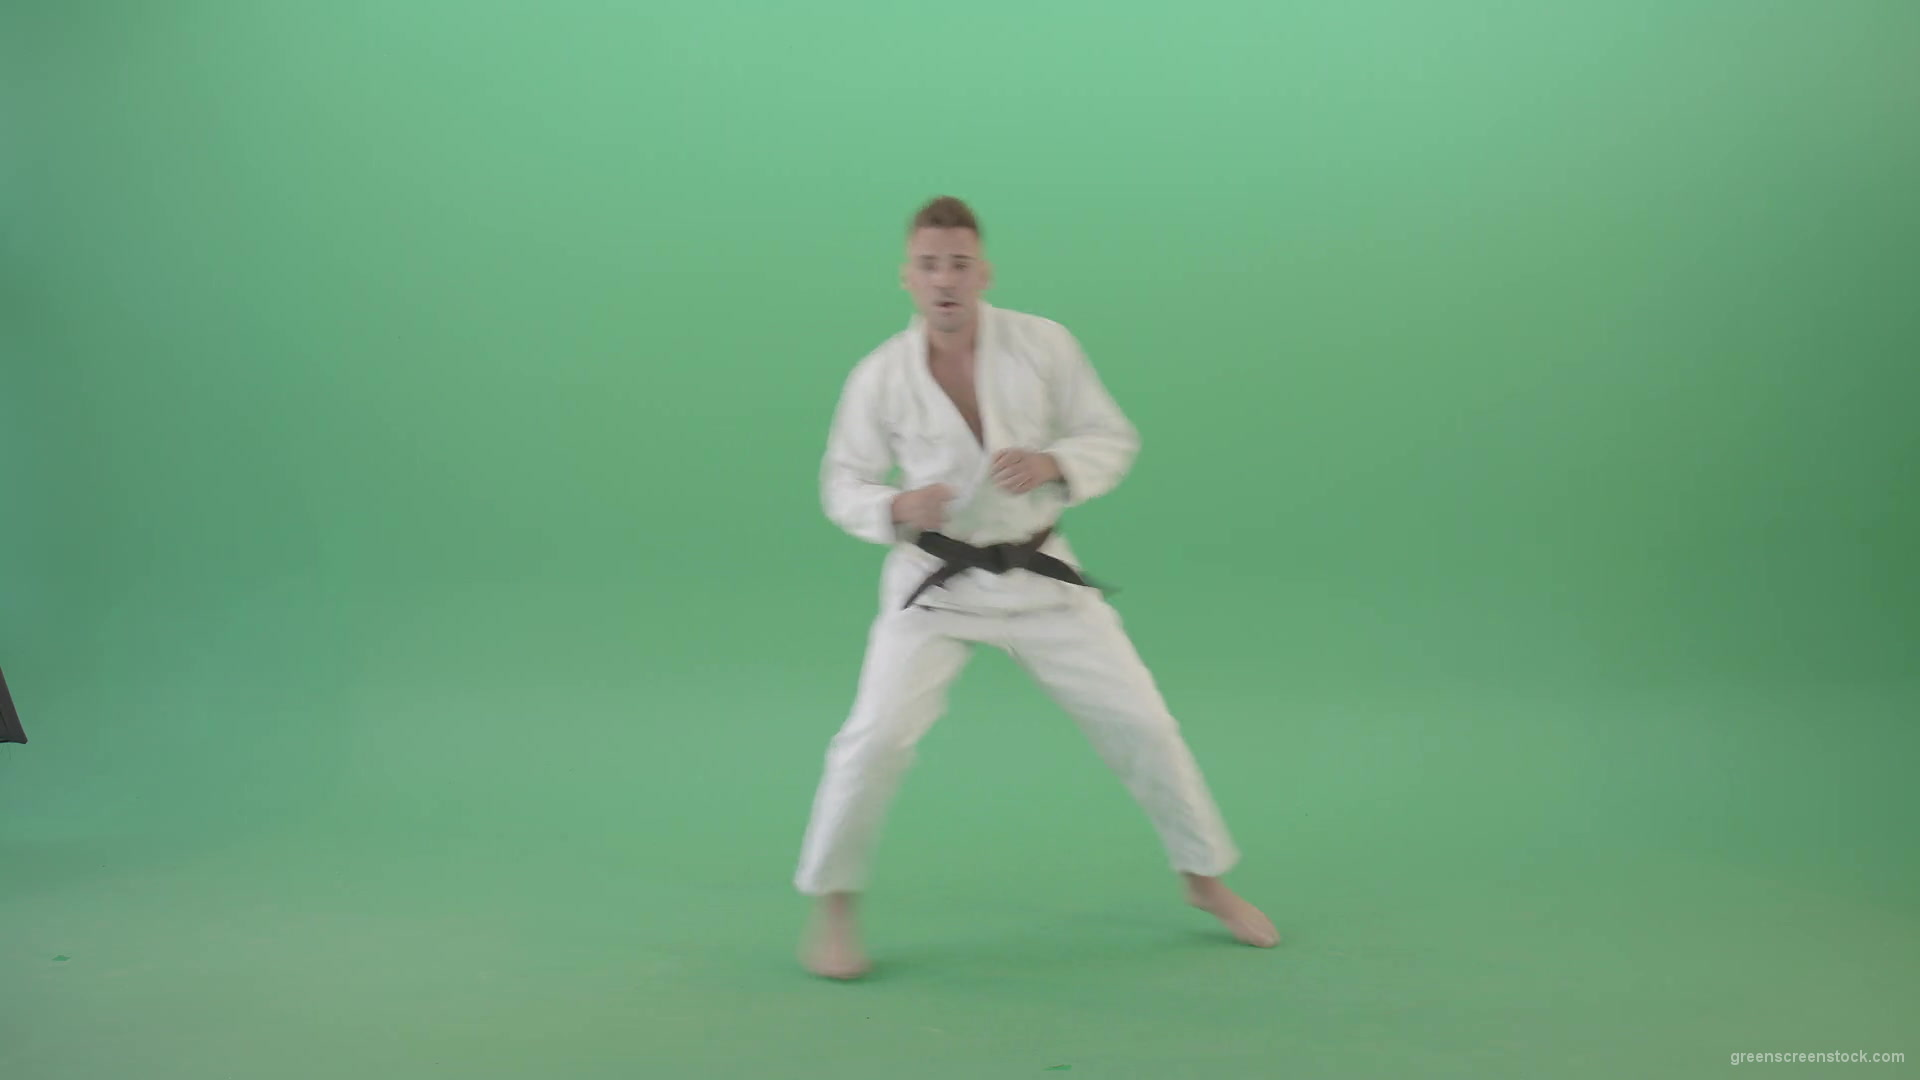 vj video background Jujutsu-Sportman-make-front-kick-and-punch-isolated-on-green-screen-4K-Video-Footage-1920_003